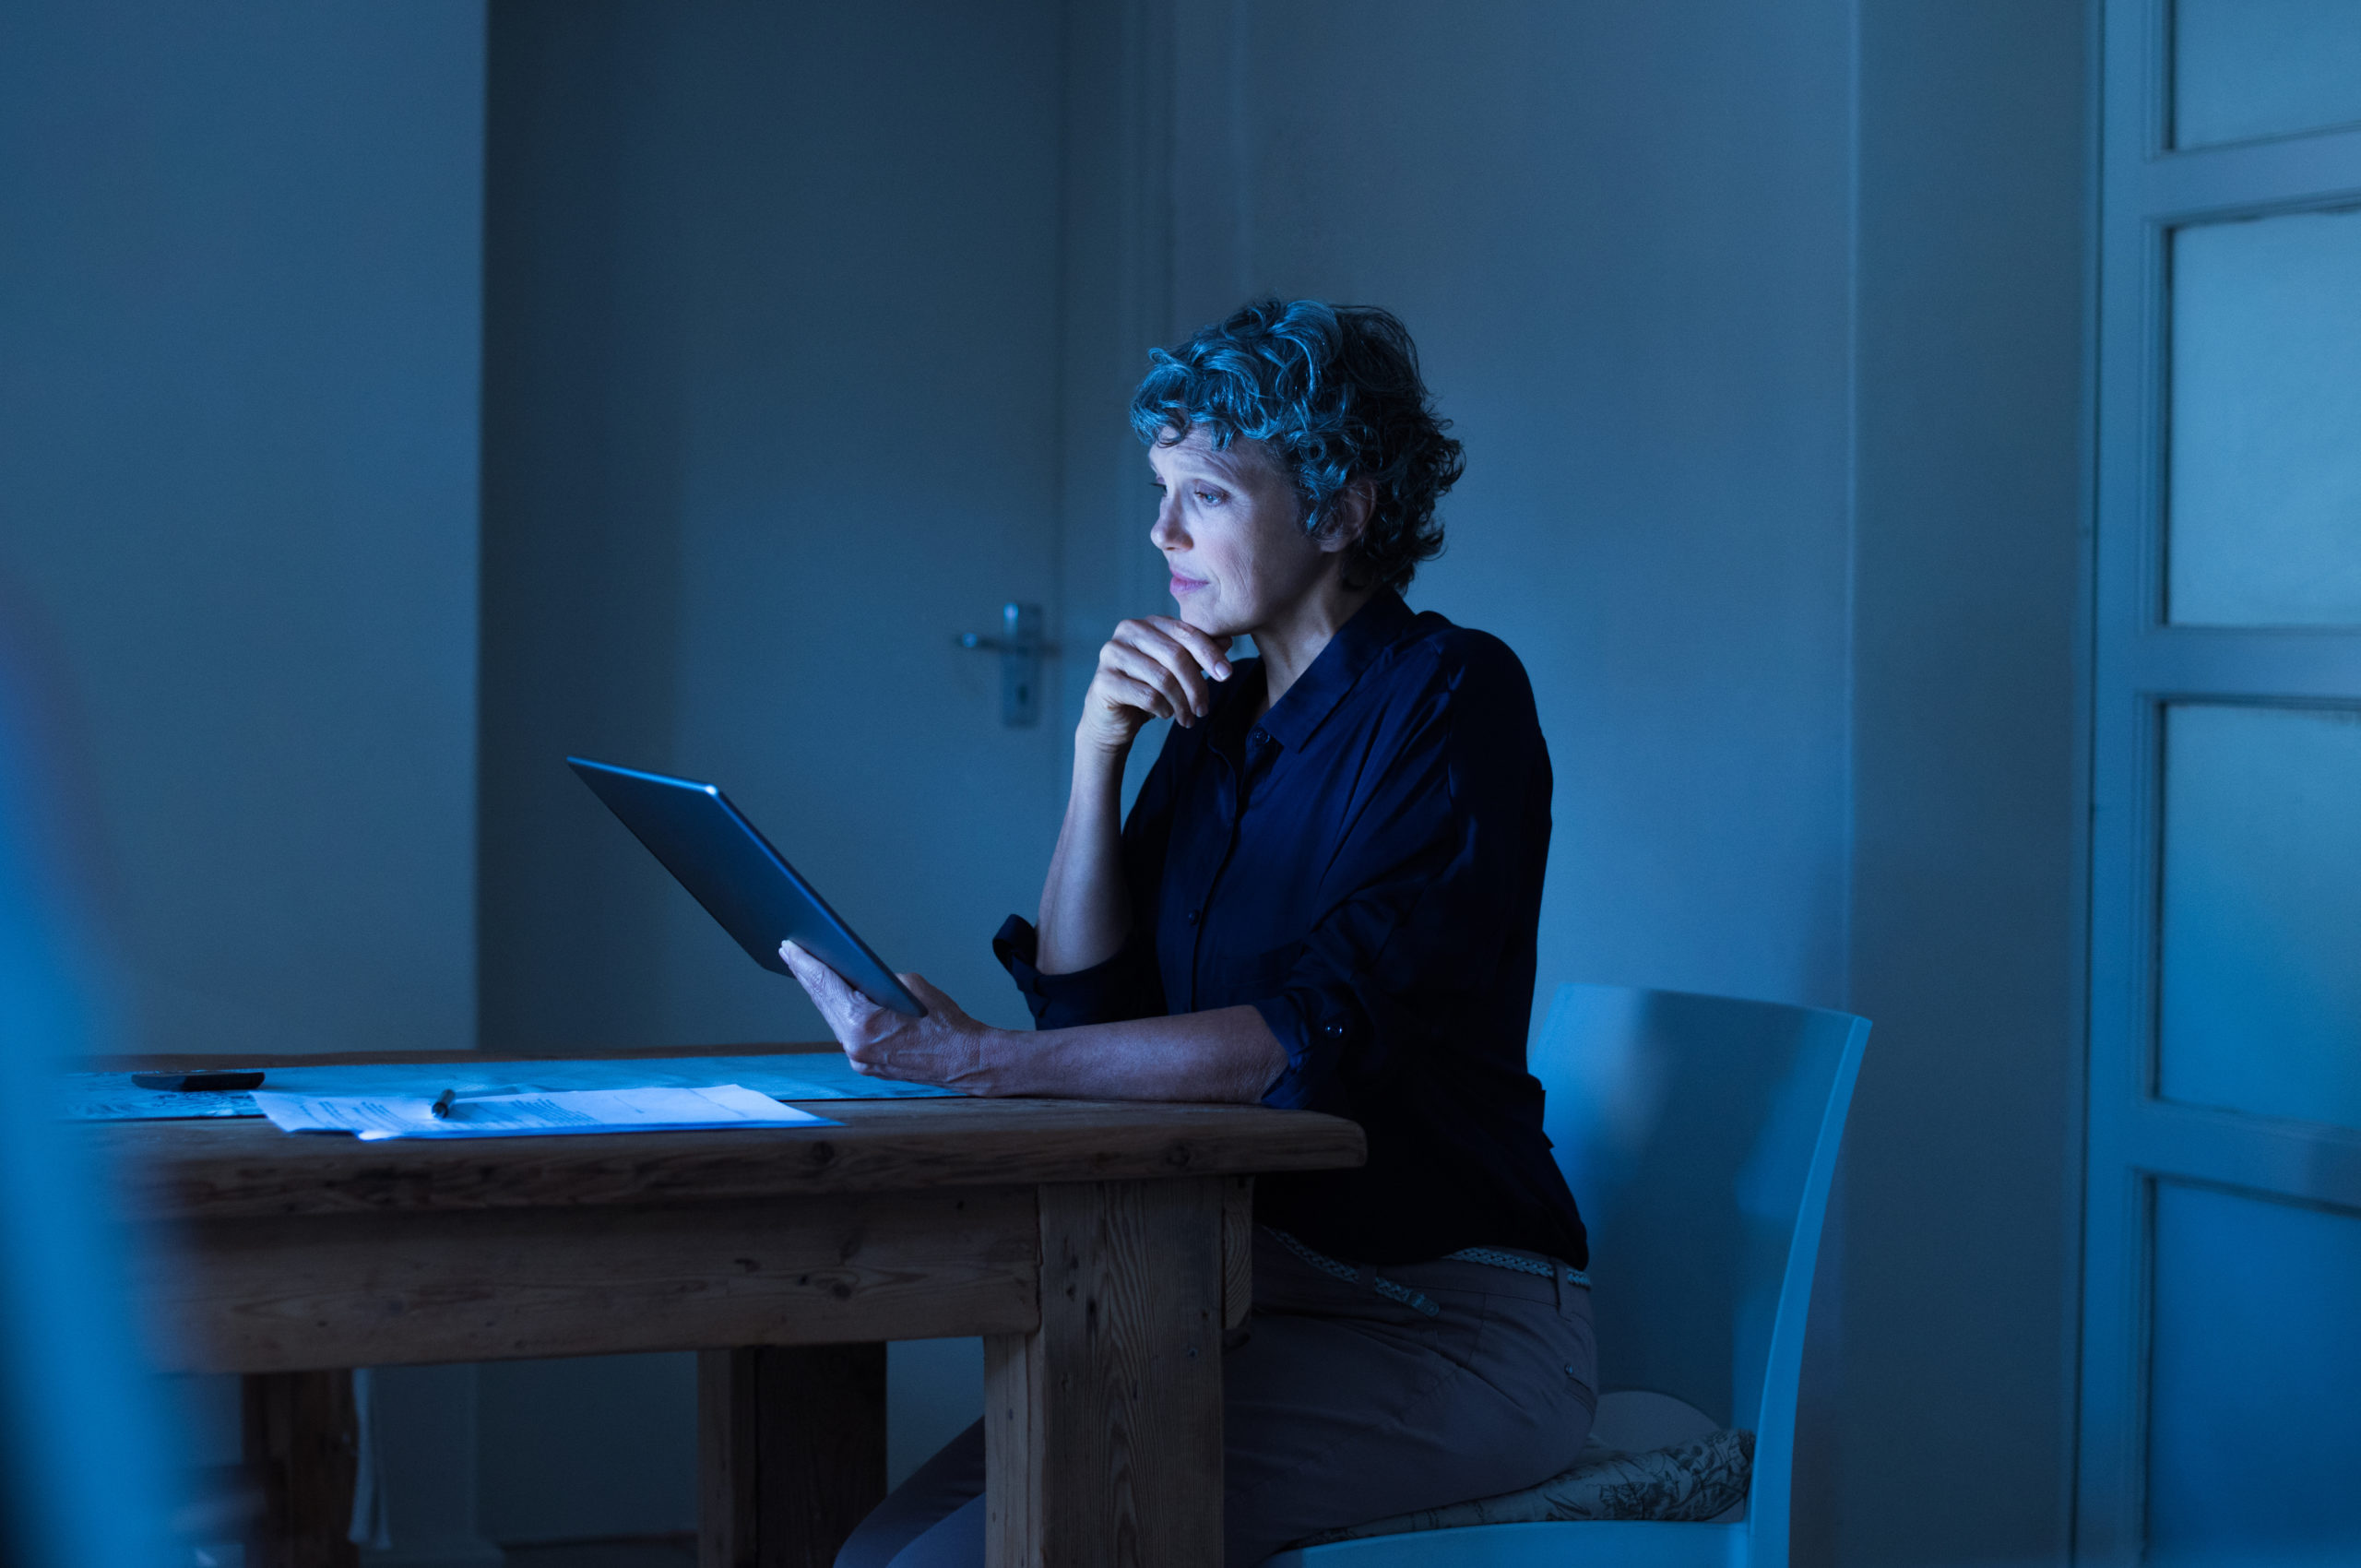 Thoughtful senior businesswoman working on digital tablet until late. Mature woman examining business report on laptop screen. Senior woman in formals using digital tablet at home during the night.